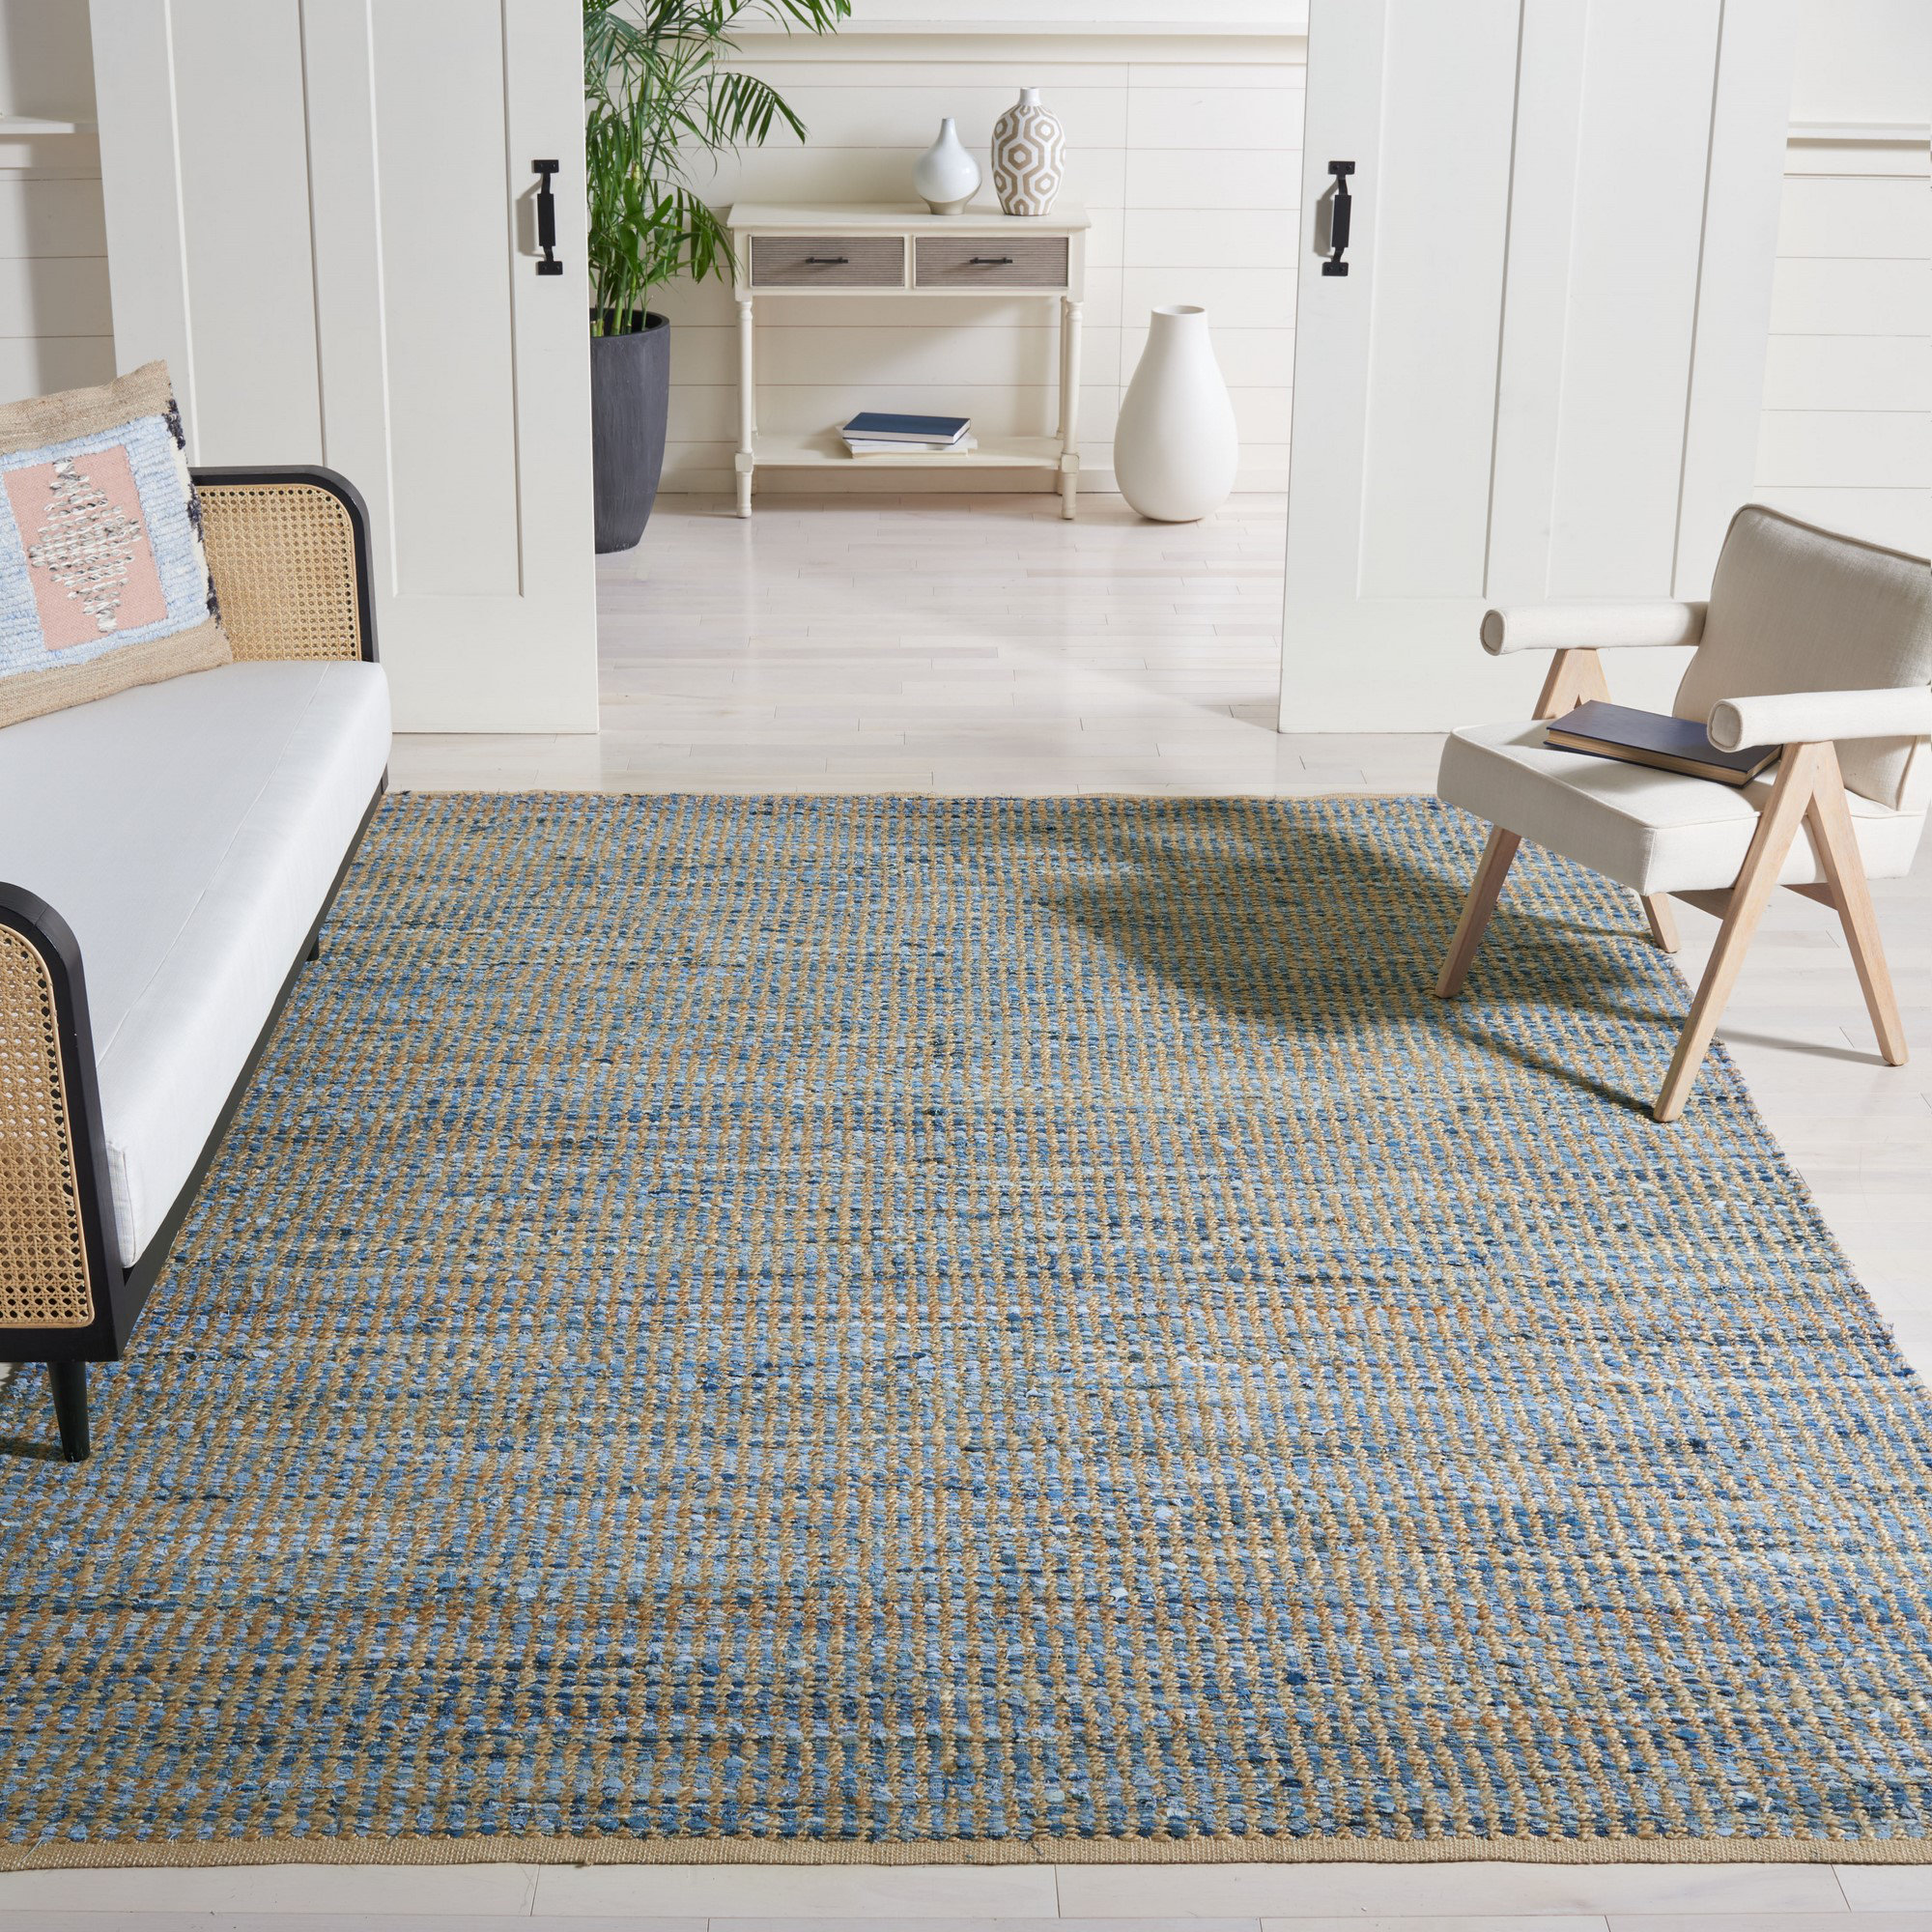 NON-SLIP,COFFEE,GREY,KITCHEN,LIVING ROOM,ANY ROOM LARGE MODERN RUGS FLATWEAVE 